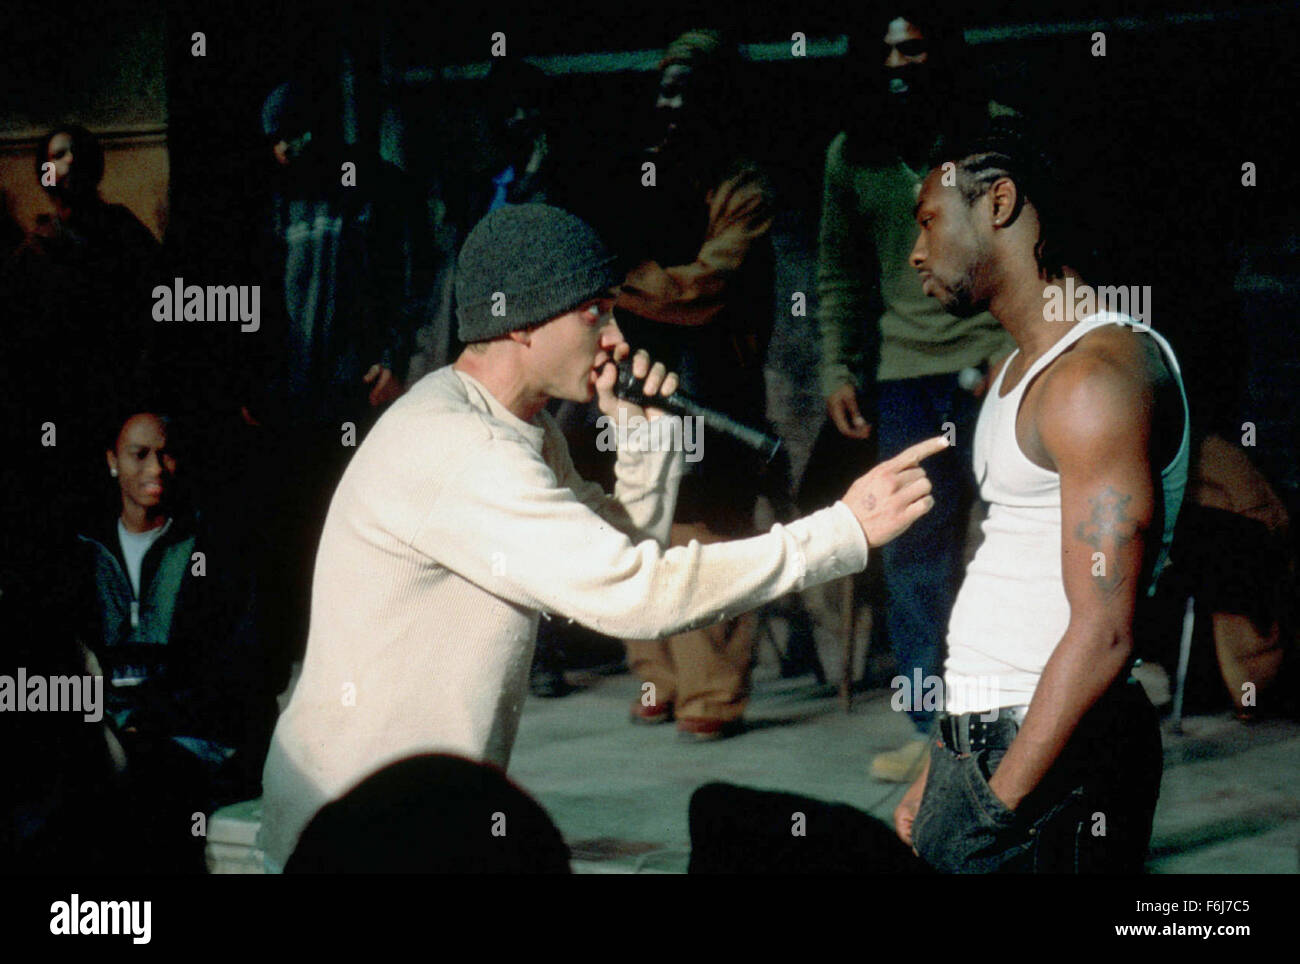 Rap Battle High Resolution Stock Photography and Images - Alamy